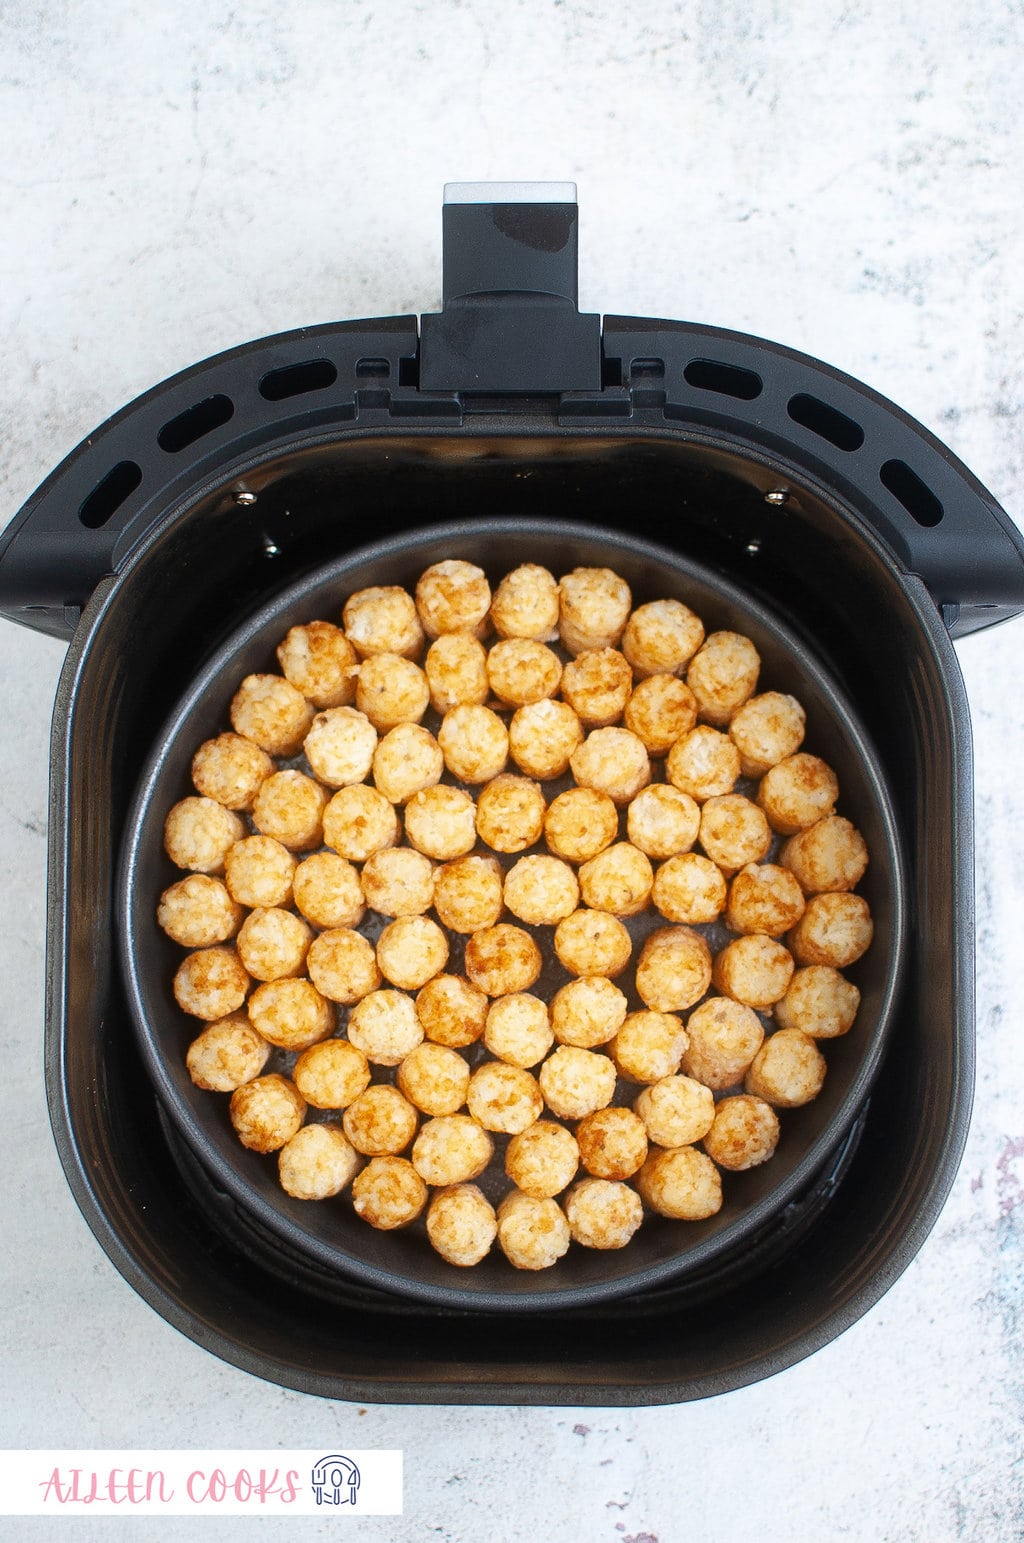 Tater tots layered perfectly in an air fryer basket